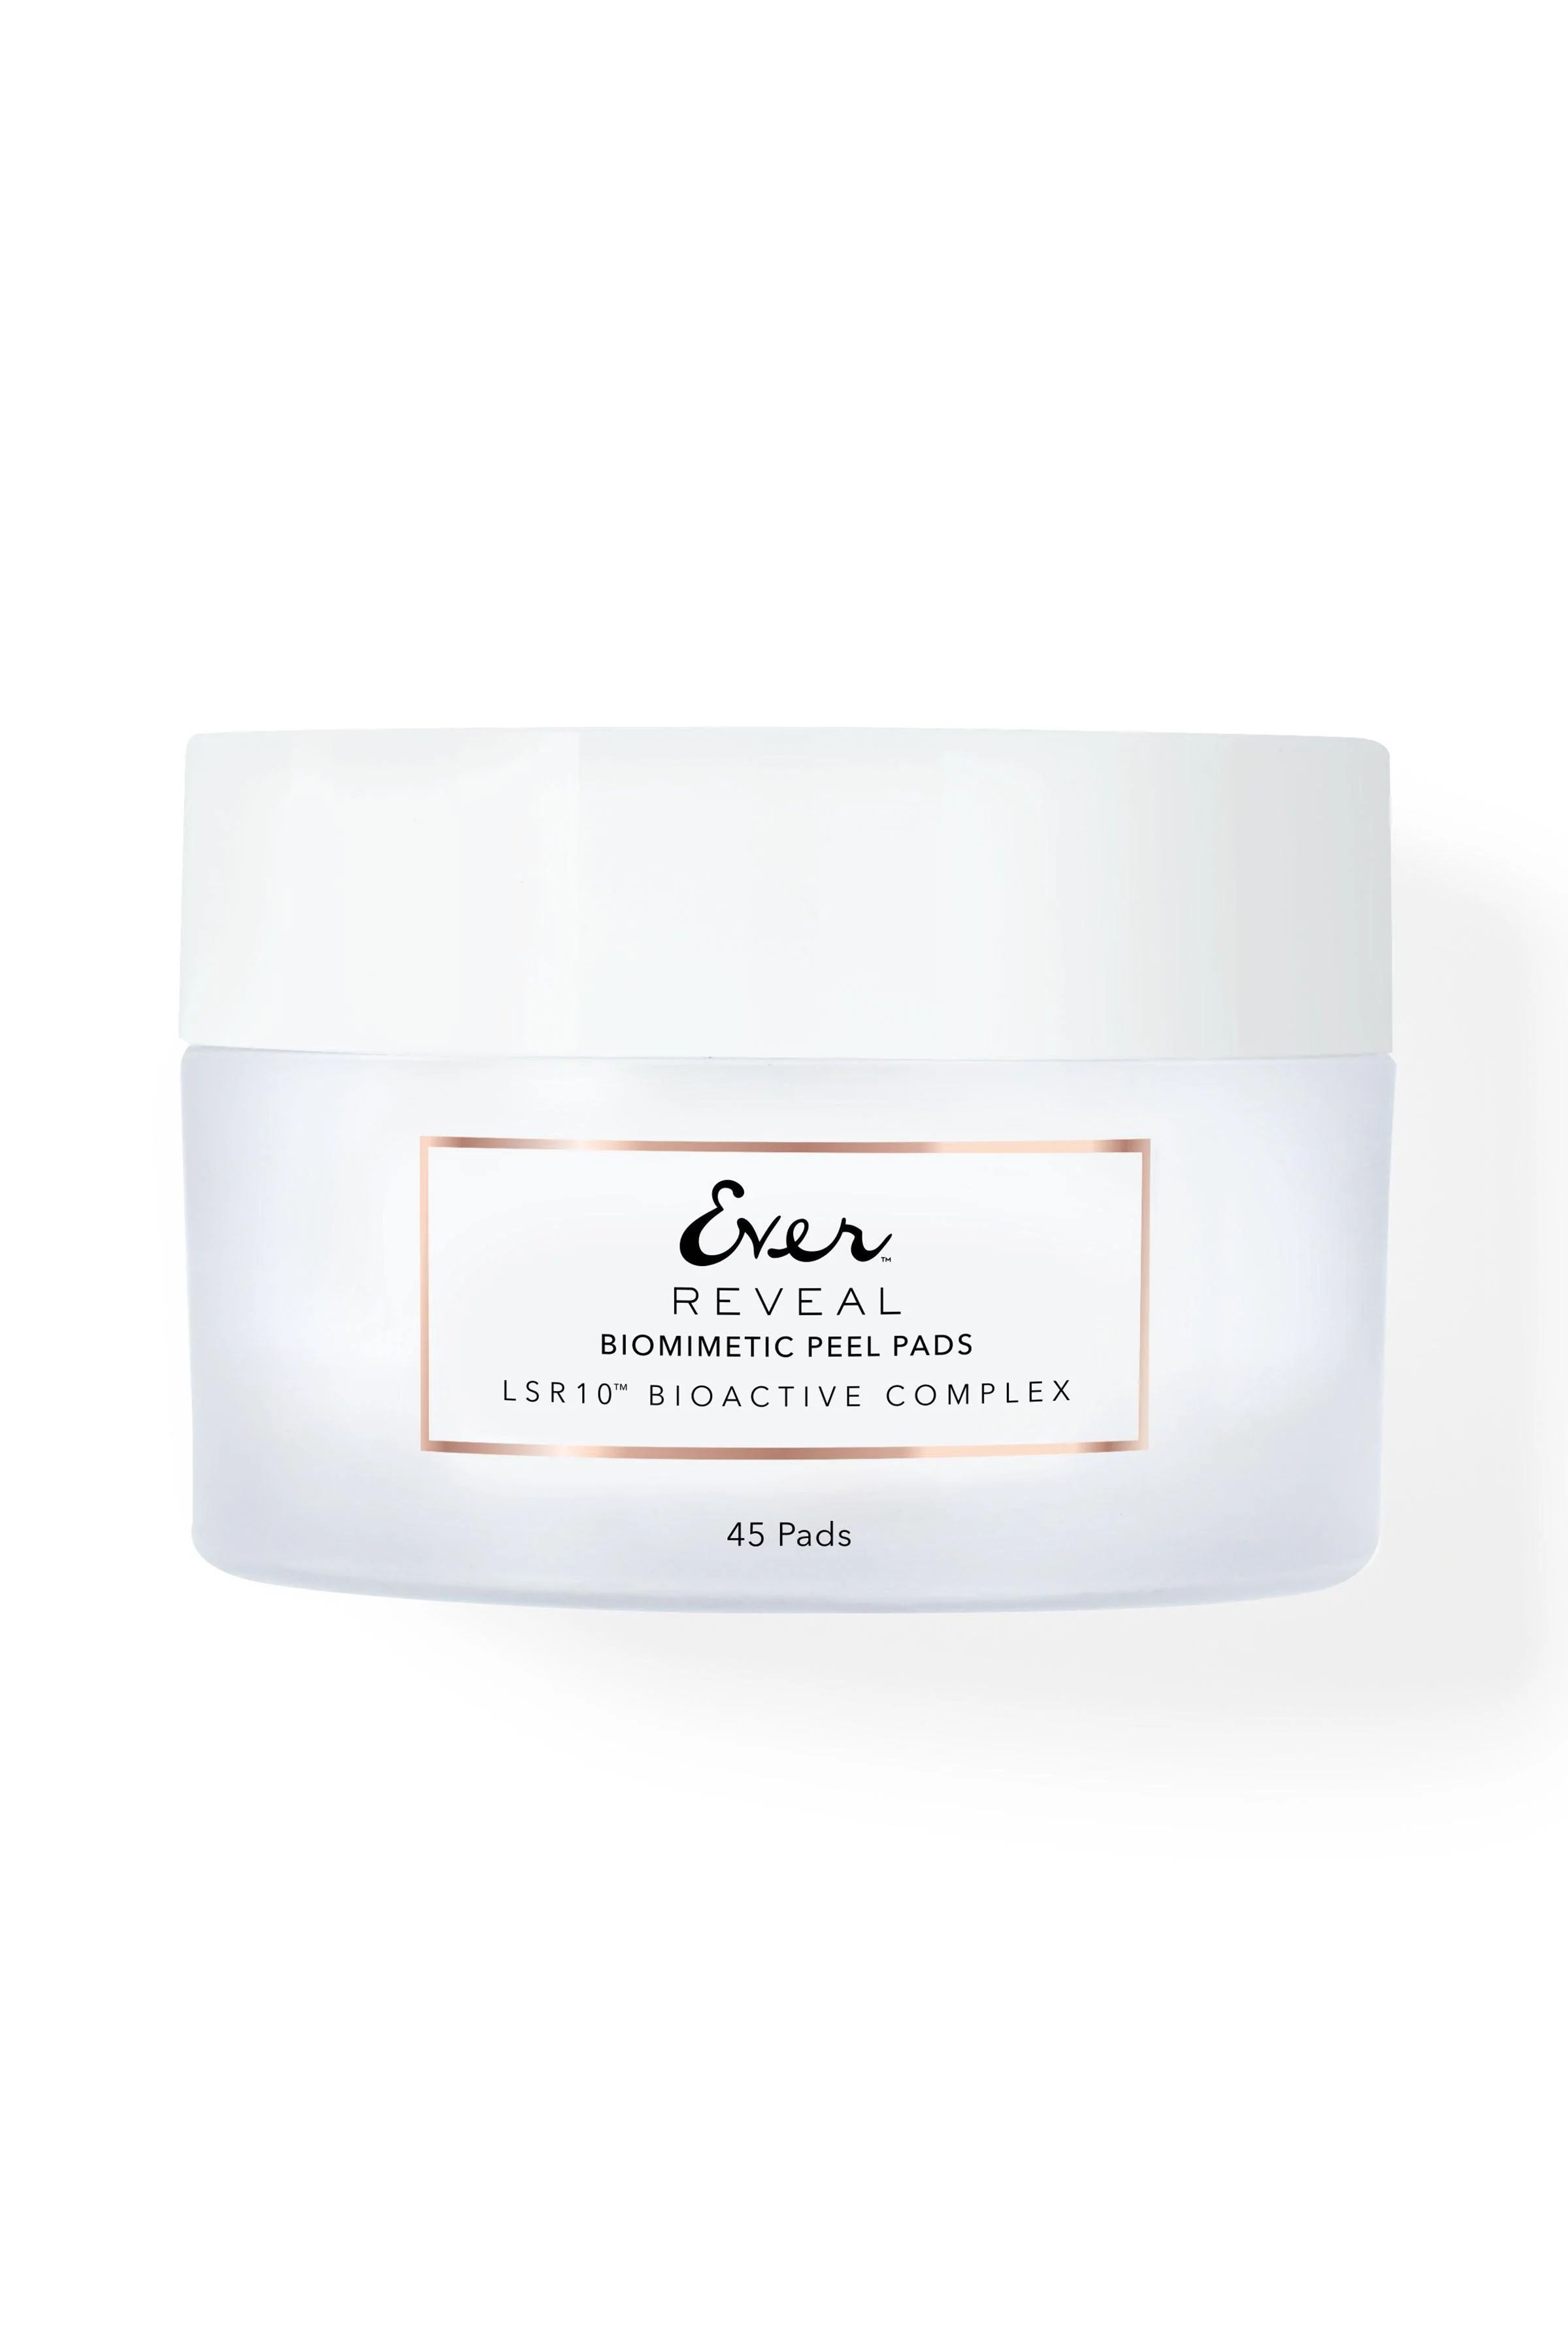 REVEAL Biomimetic Peel Pads with LSR10® (45 Pads) | EVER Skincare